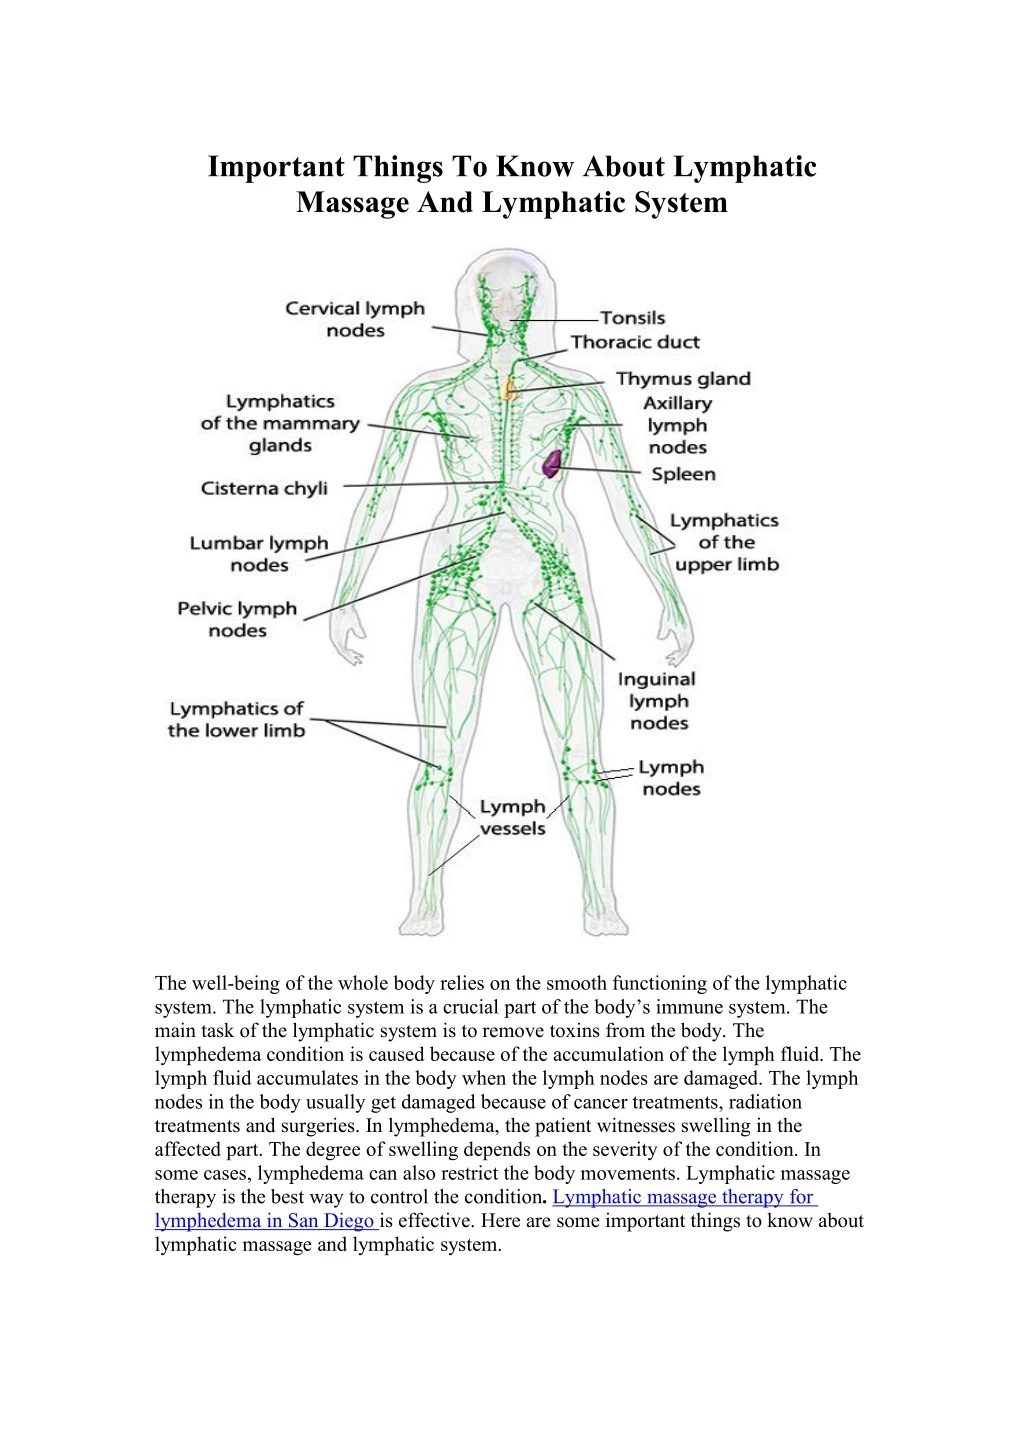 important things to know about lymphatic massage